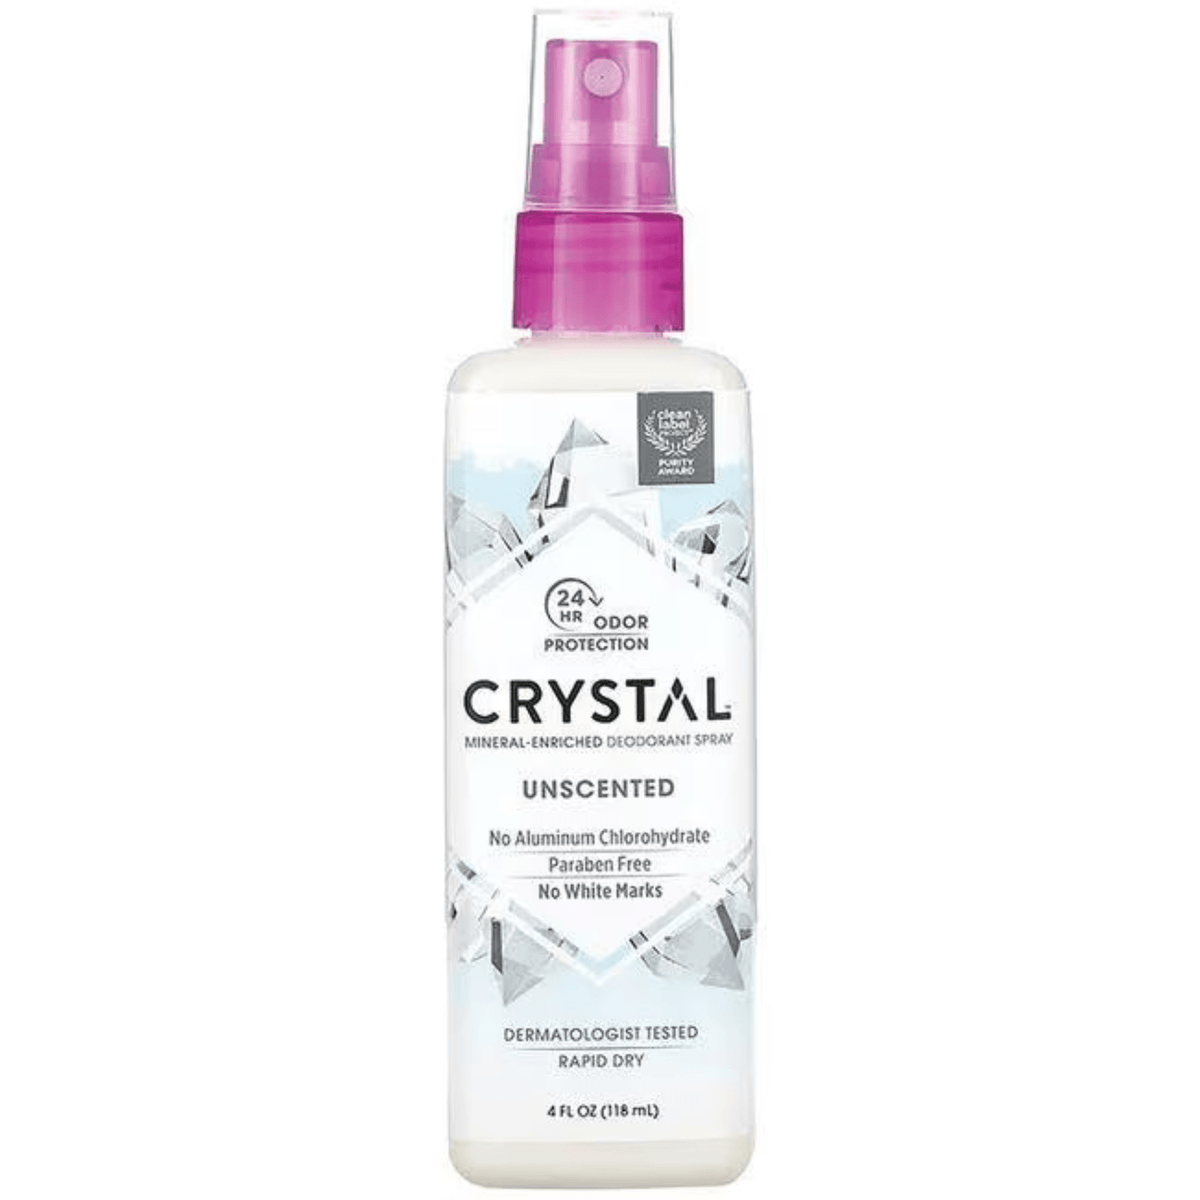 Primary Image of Crystal Body Spray